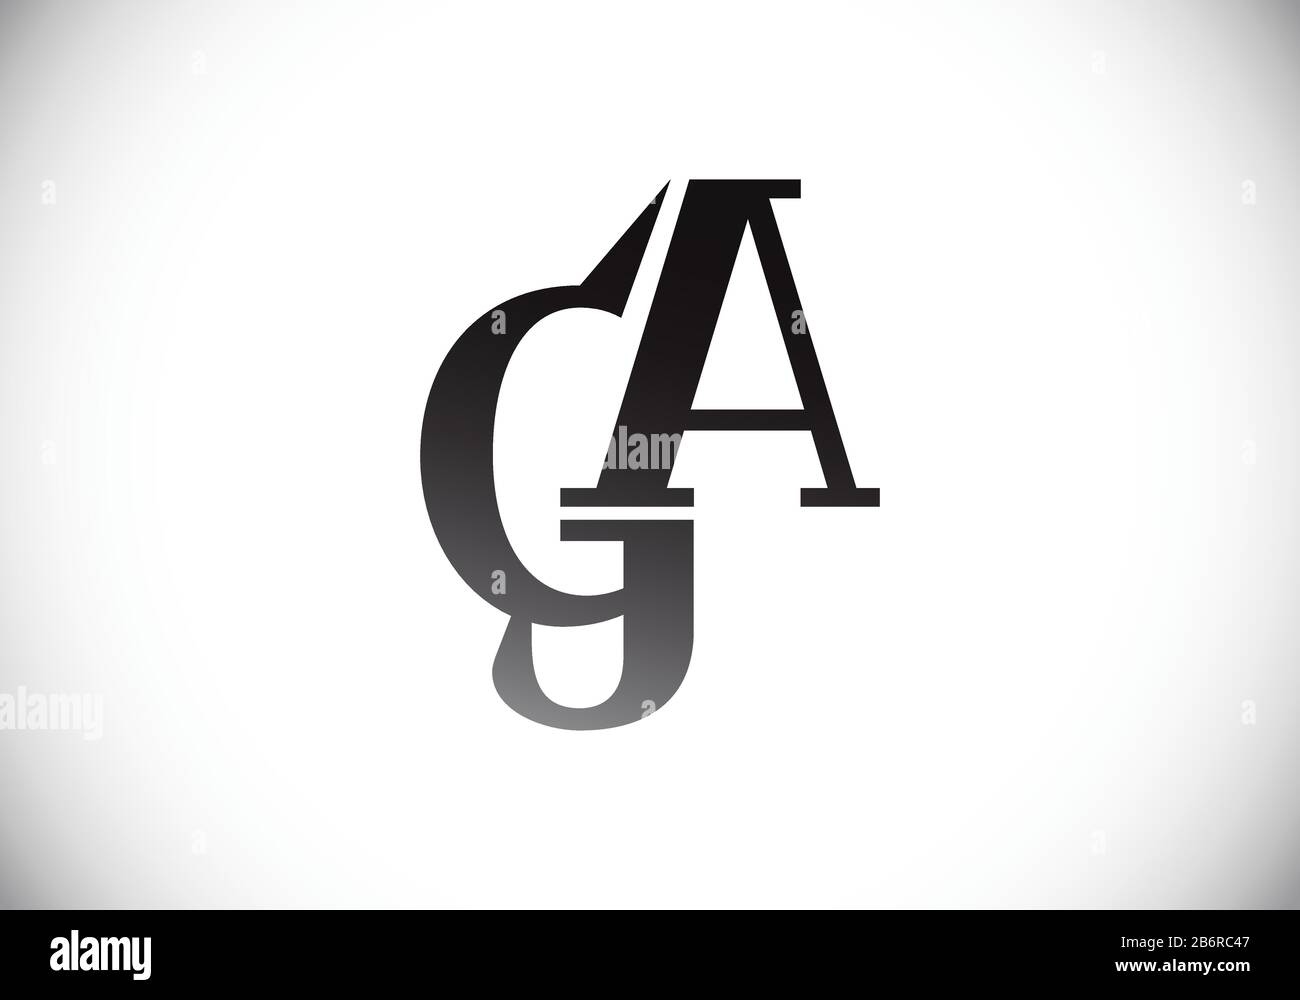 G A, GA Initial Letter Logo design vector template, Graphic Alphabet Symbol for Corporate Business Identity Stock Vector